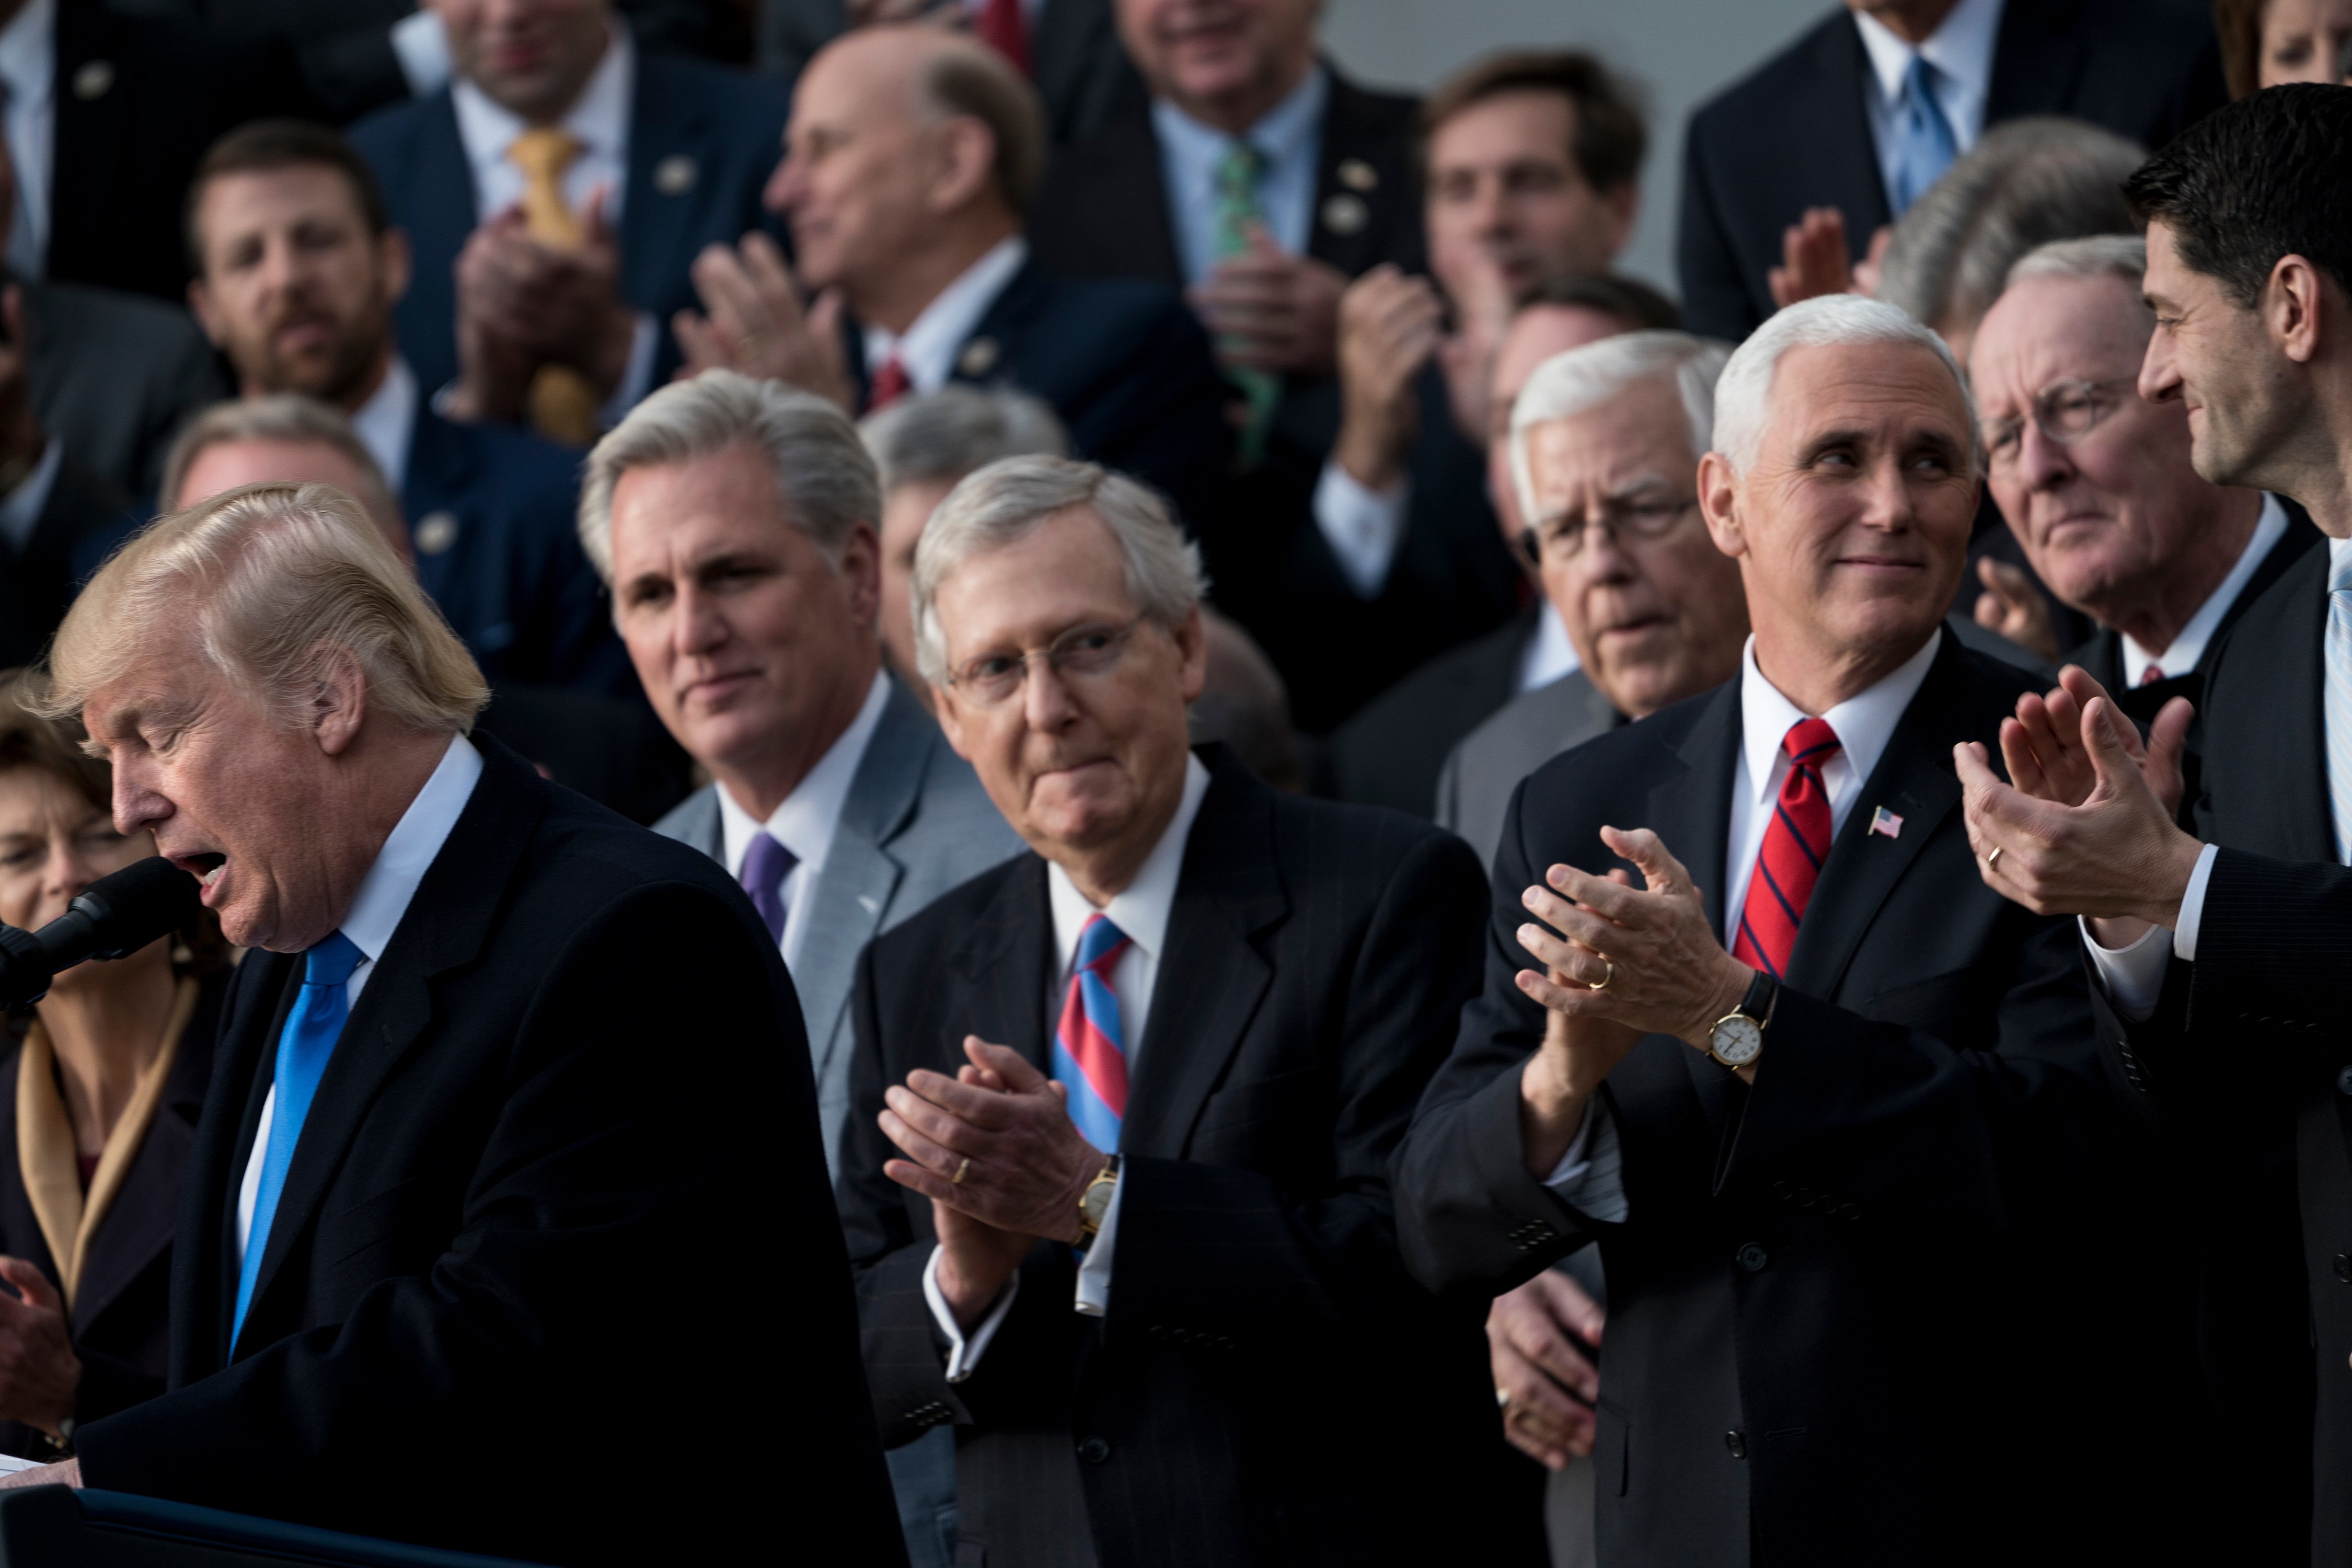 House Majority Leader Representative Kevin McCarthy (R-CA) (2L), Senate Majority Leader Senator Mitch McConnell (R-KY) (C), US Vice President Mike Pence (2R), Speaker of the House Paul Ryan (R-WI) (R) and others listen while US President Donald Trump speaks about newly passed tax reform legislation during an event December 20, 2017 in Washington, DC. Trump hailed a "historic" victory Wednesday as the US Congress passed a massive Republican tax cut plan, handing the president his first major legislative achievement since taking office nearly a year ago. (BRENDAN SMIALOWSKI/AFP via Getty Images)